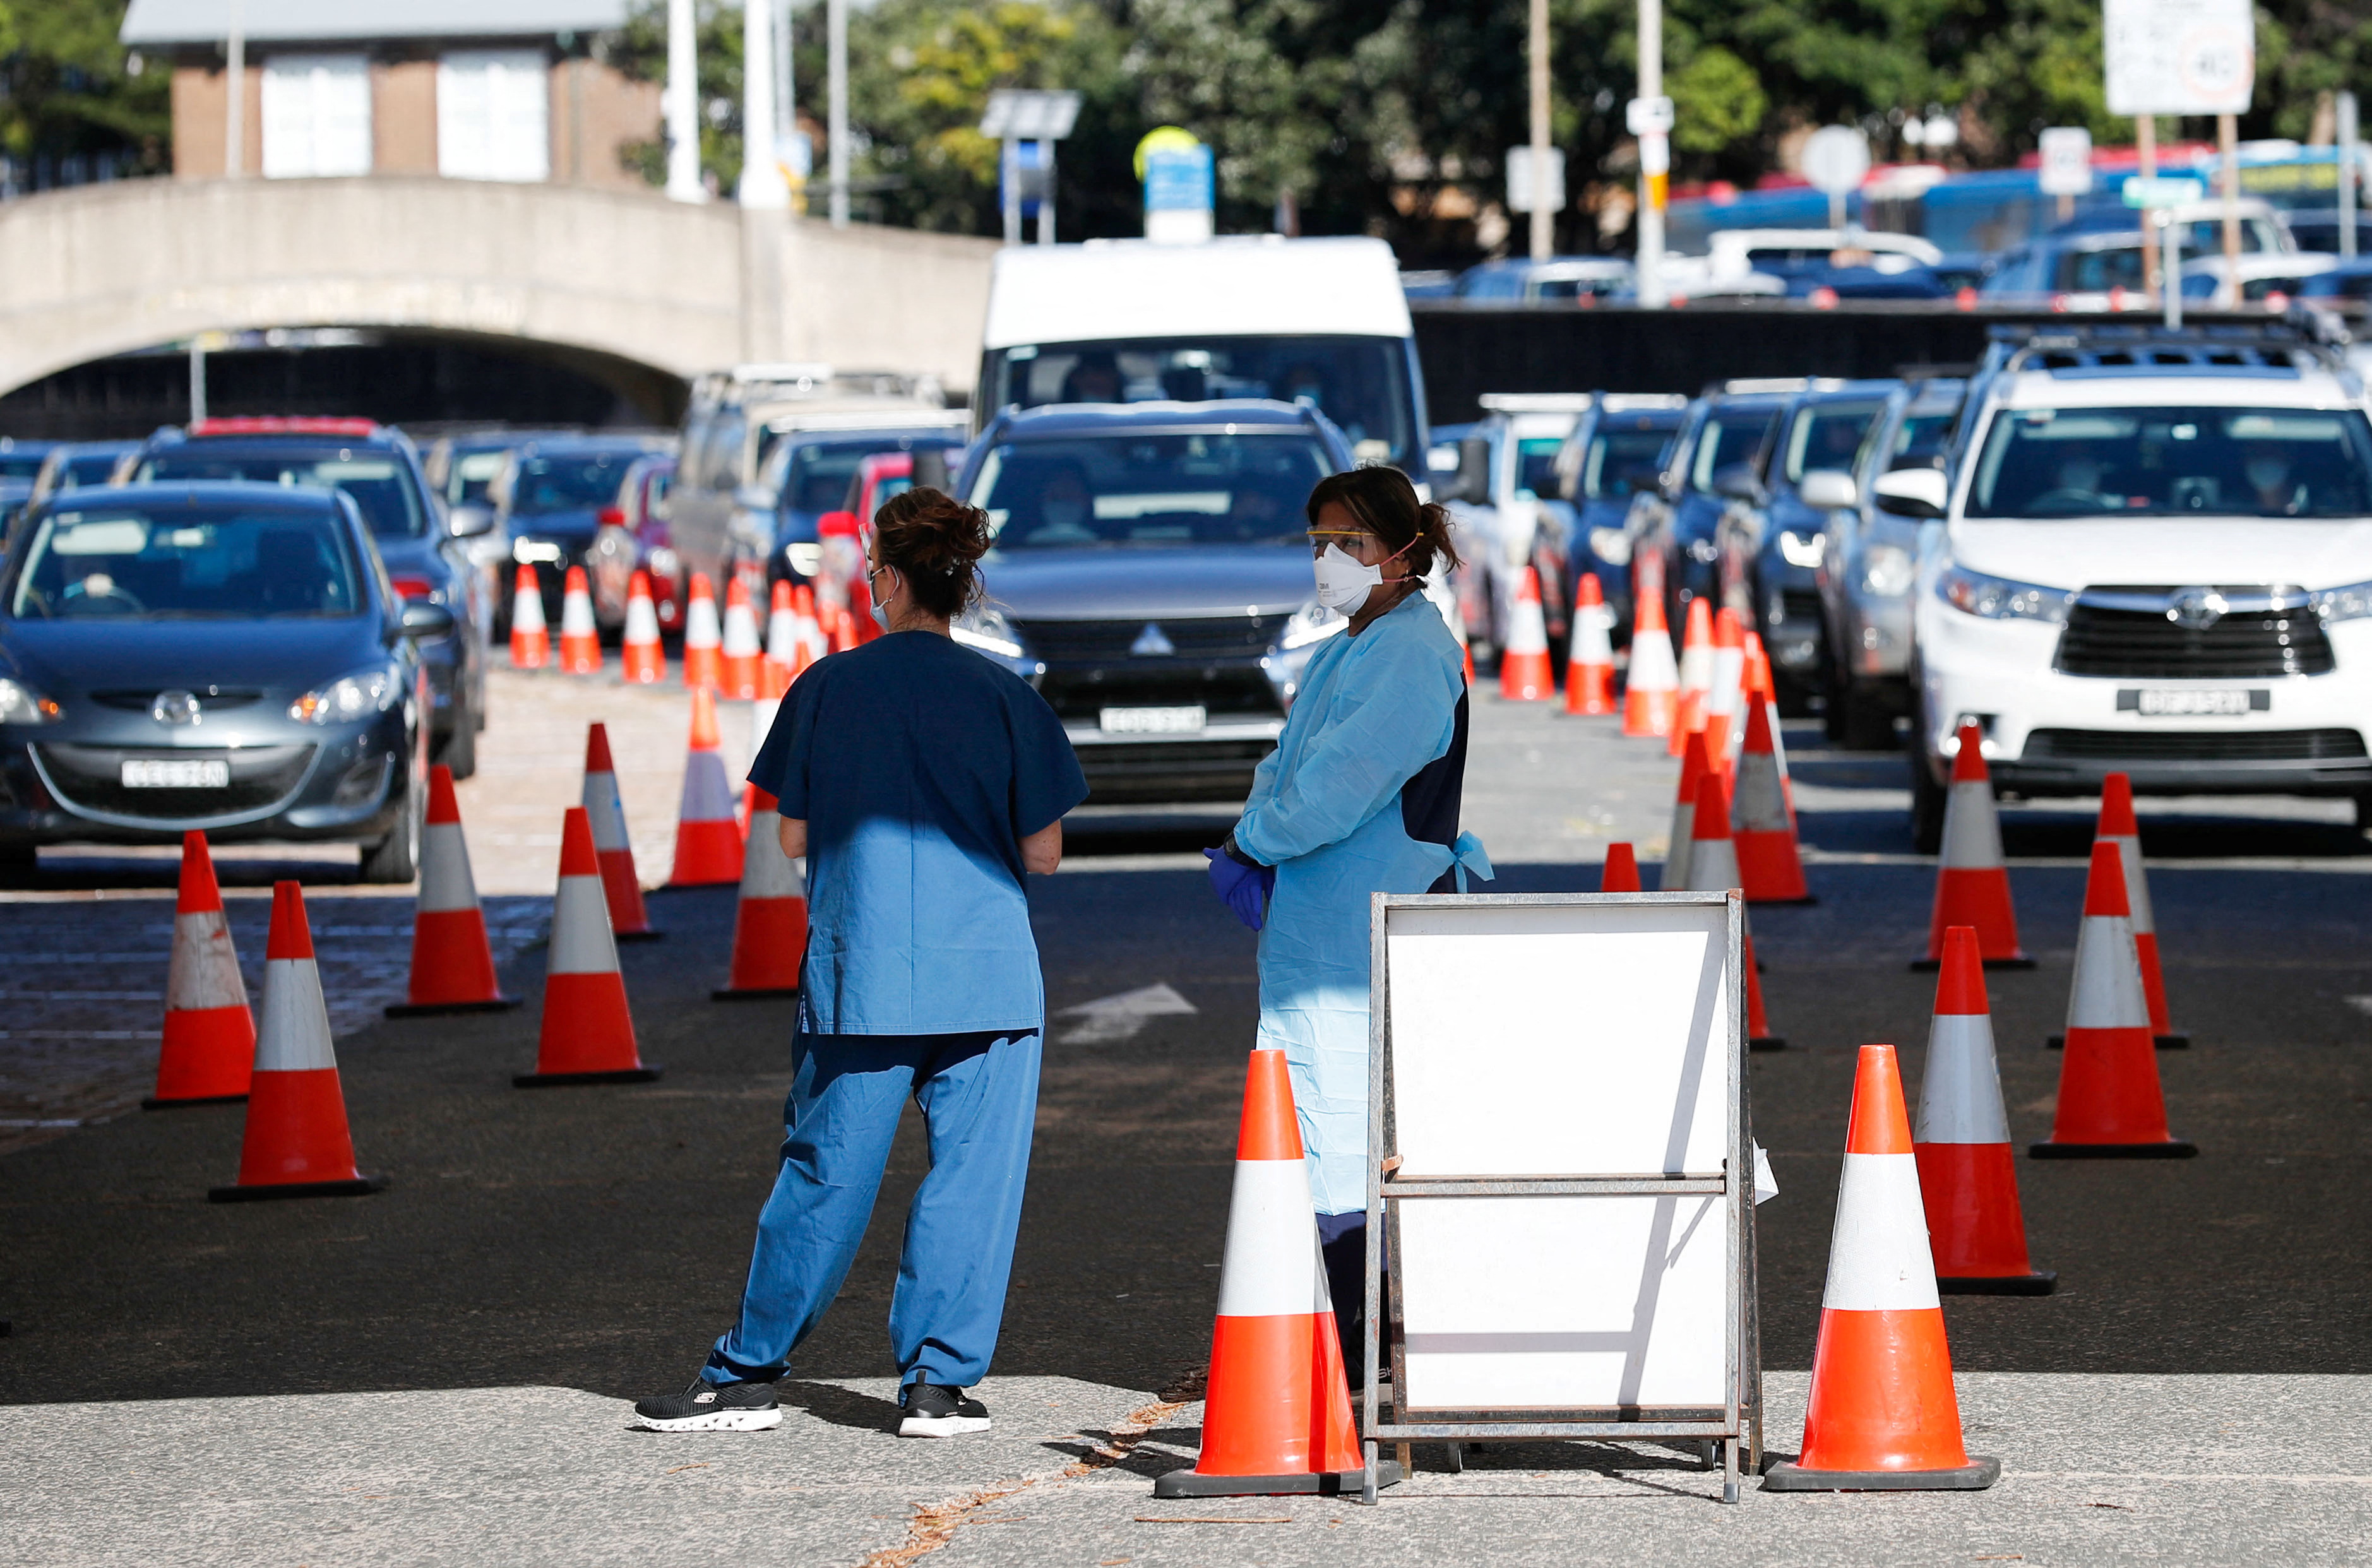 Healthcare workers wait for the next vehicle at a coronavirus disease (COVID-19) testing clinic as the Omicron coronavirus variant continues to spread in Sydney, Australia, December 30, 2021.  REUTERS/Nikki Short